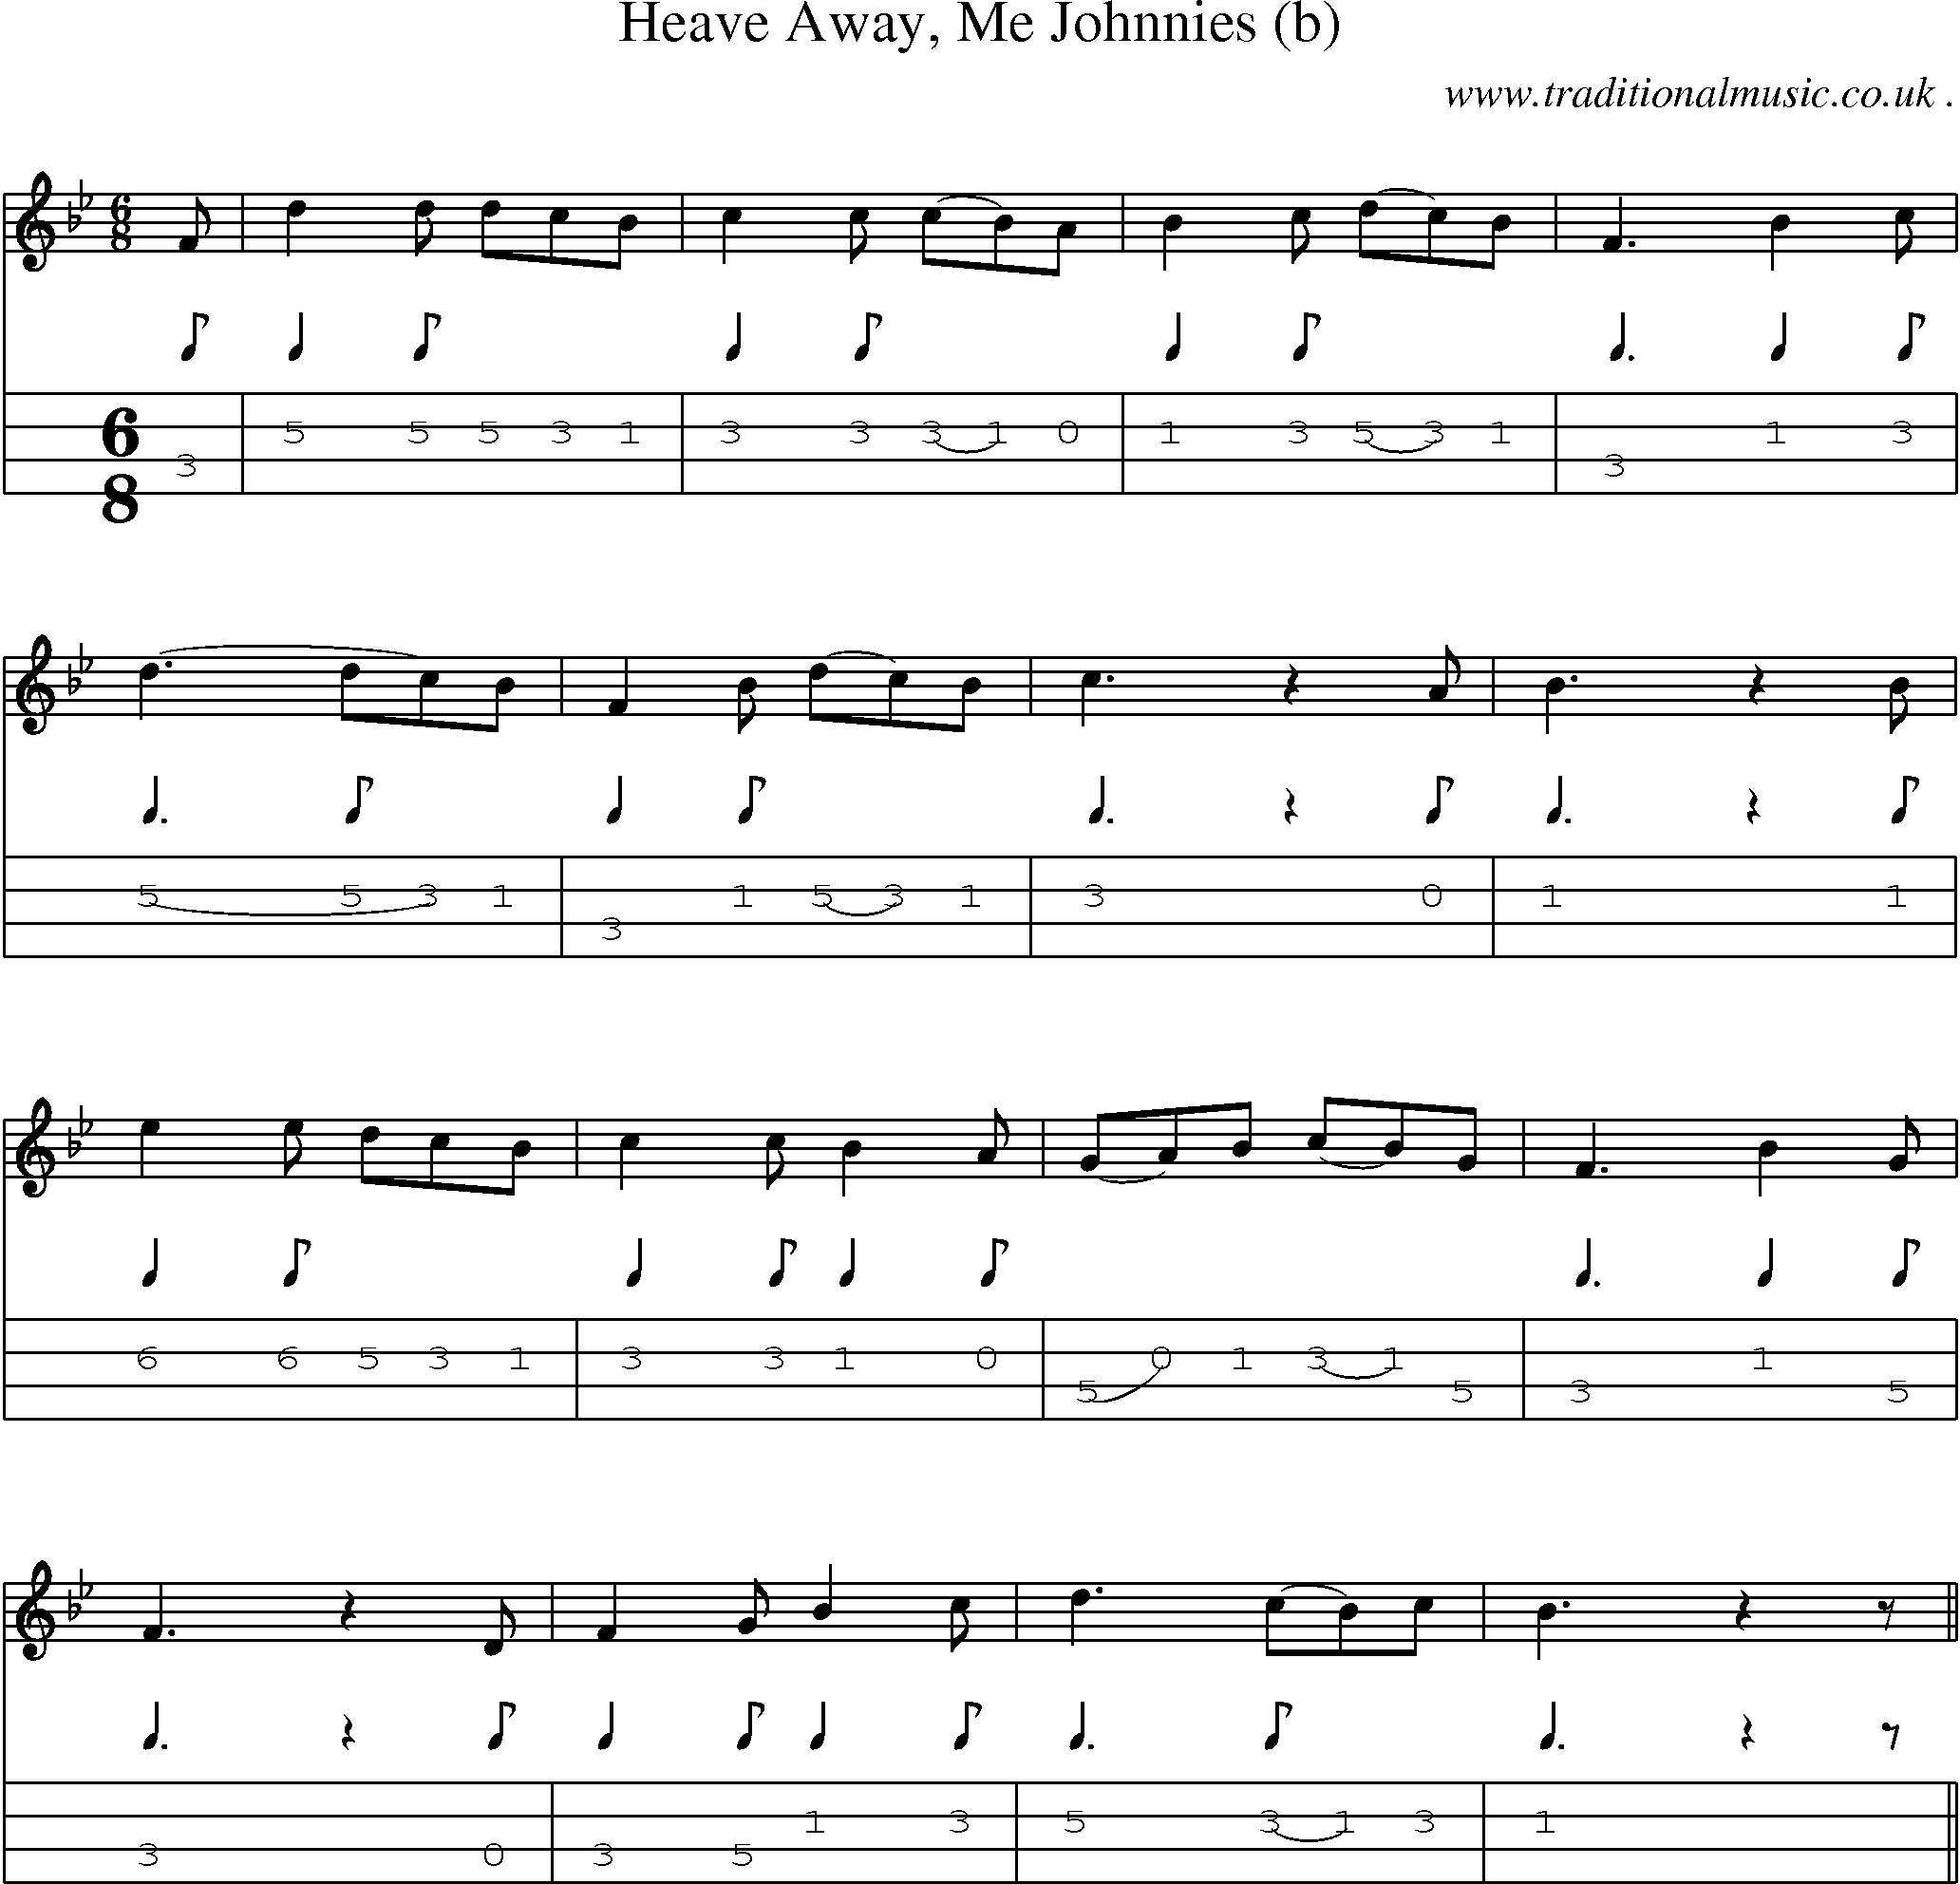 Sheet-Music and Mandolin Tabs for Heave Away Me Johnnies (b)